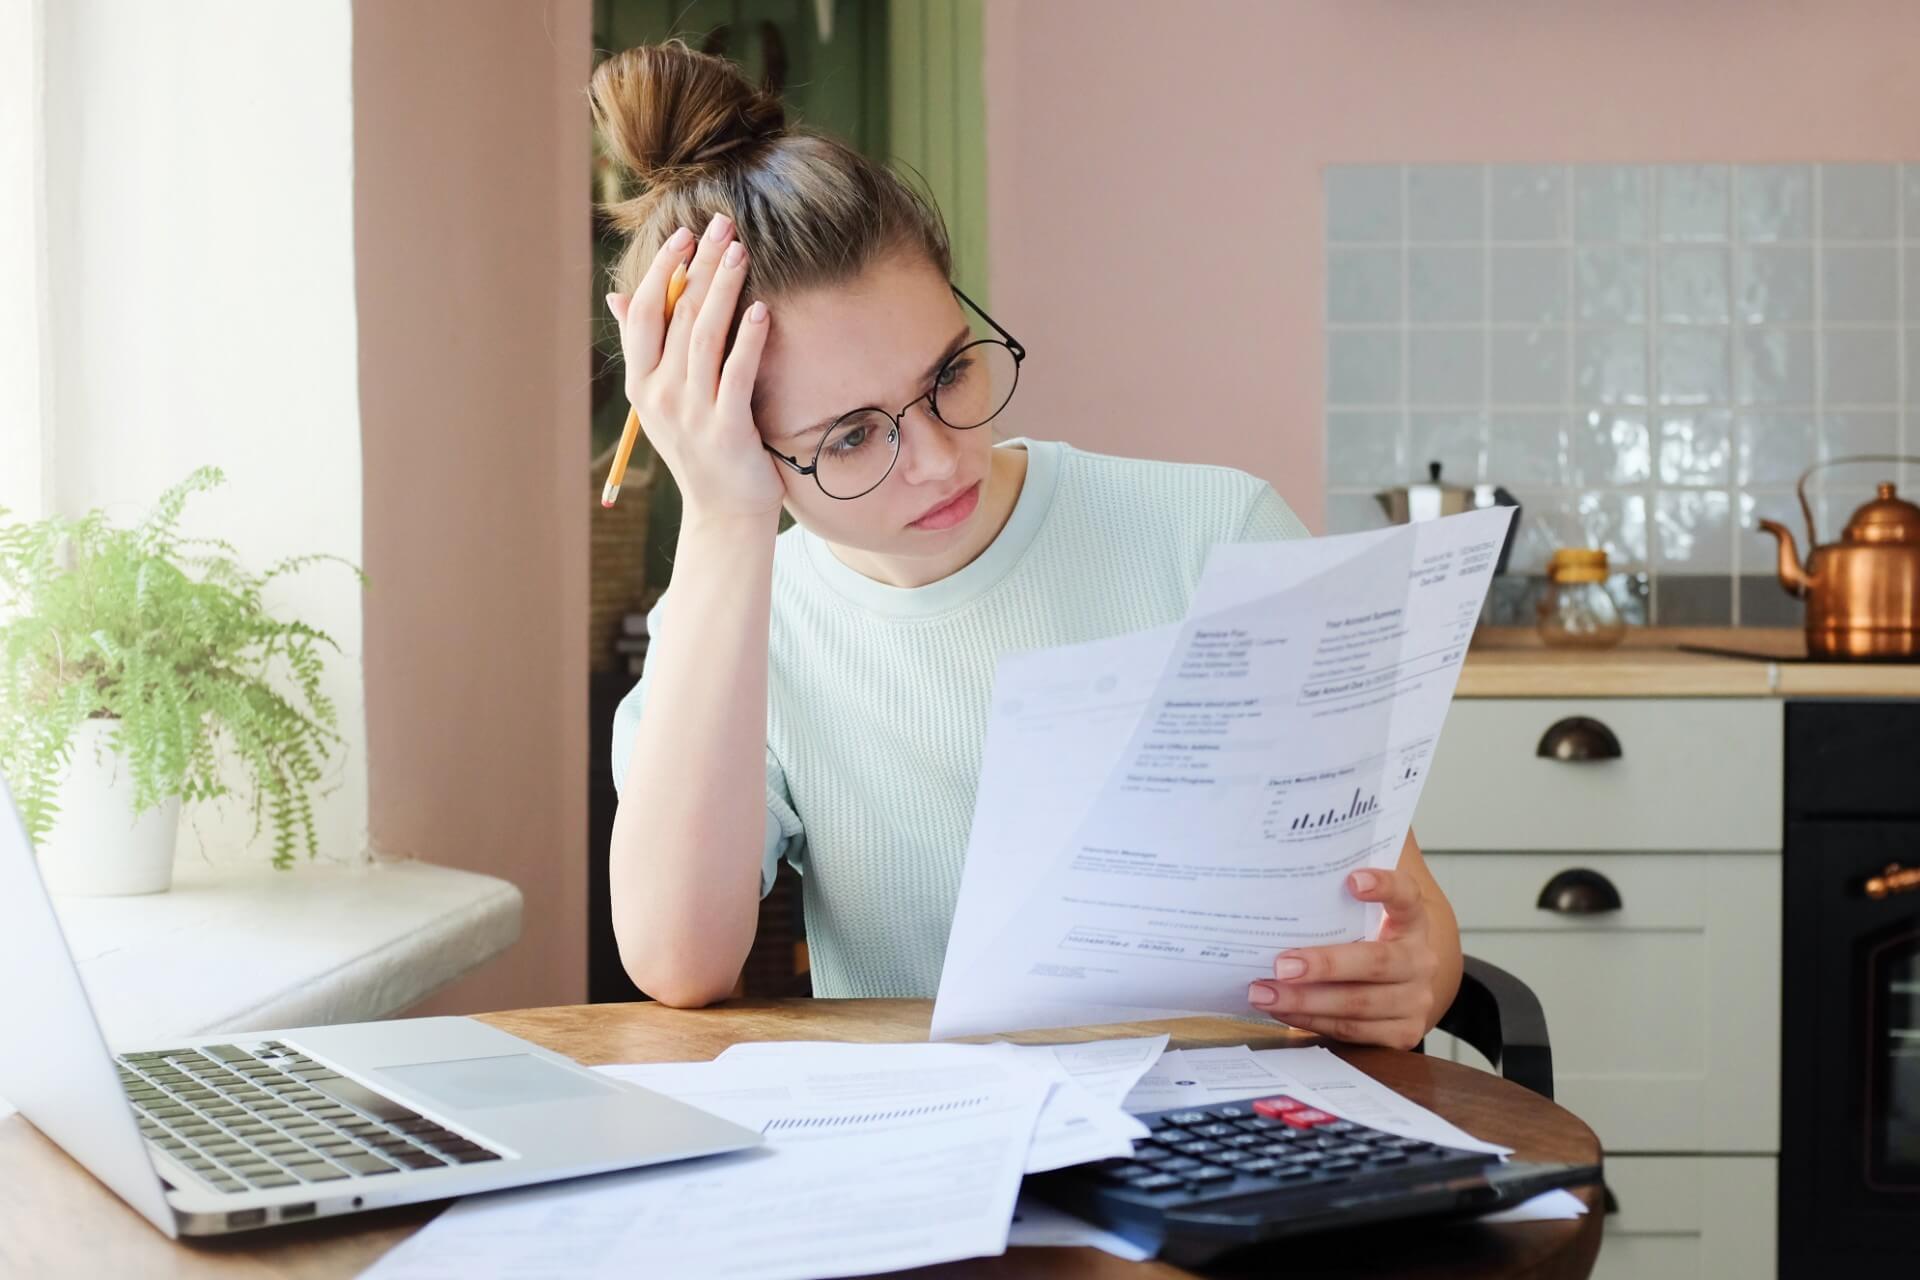 A young woman looks at health insurance paperwork with frustration and confusion